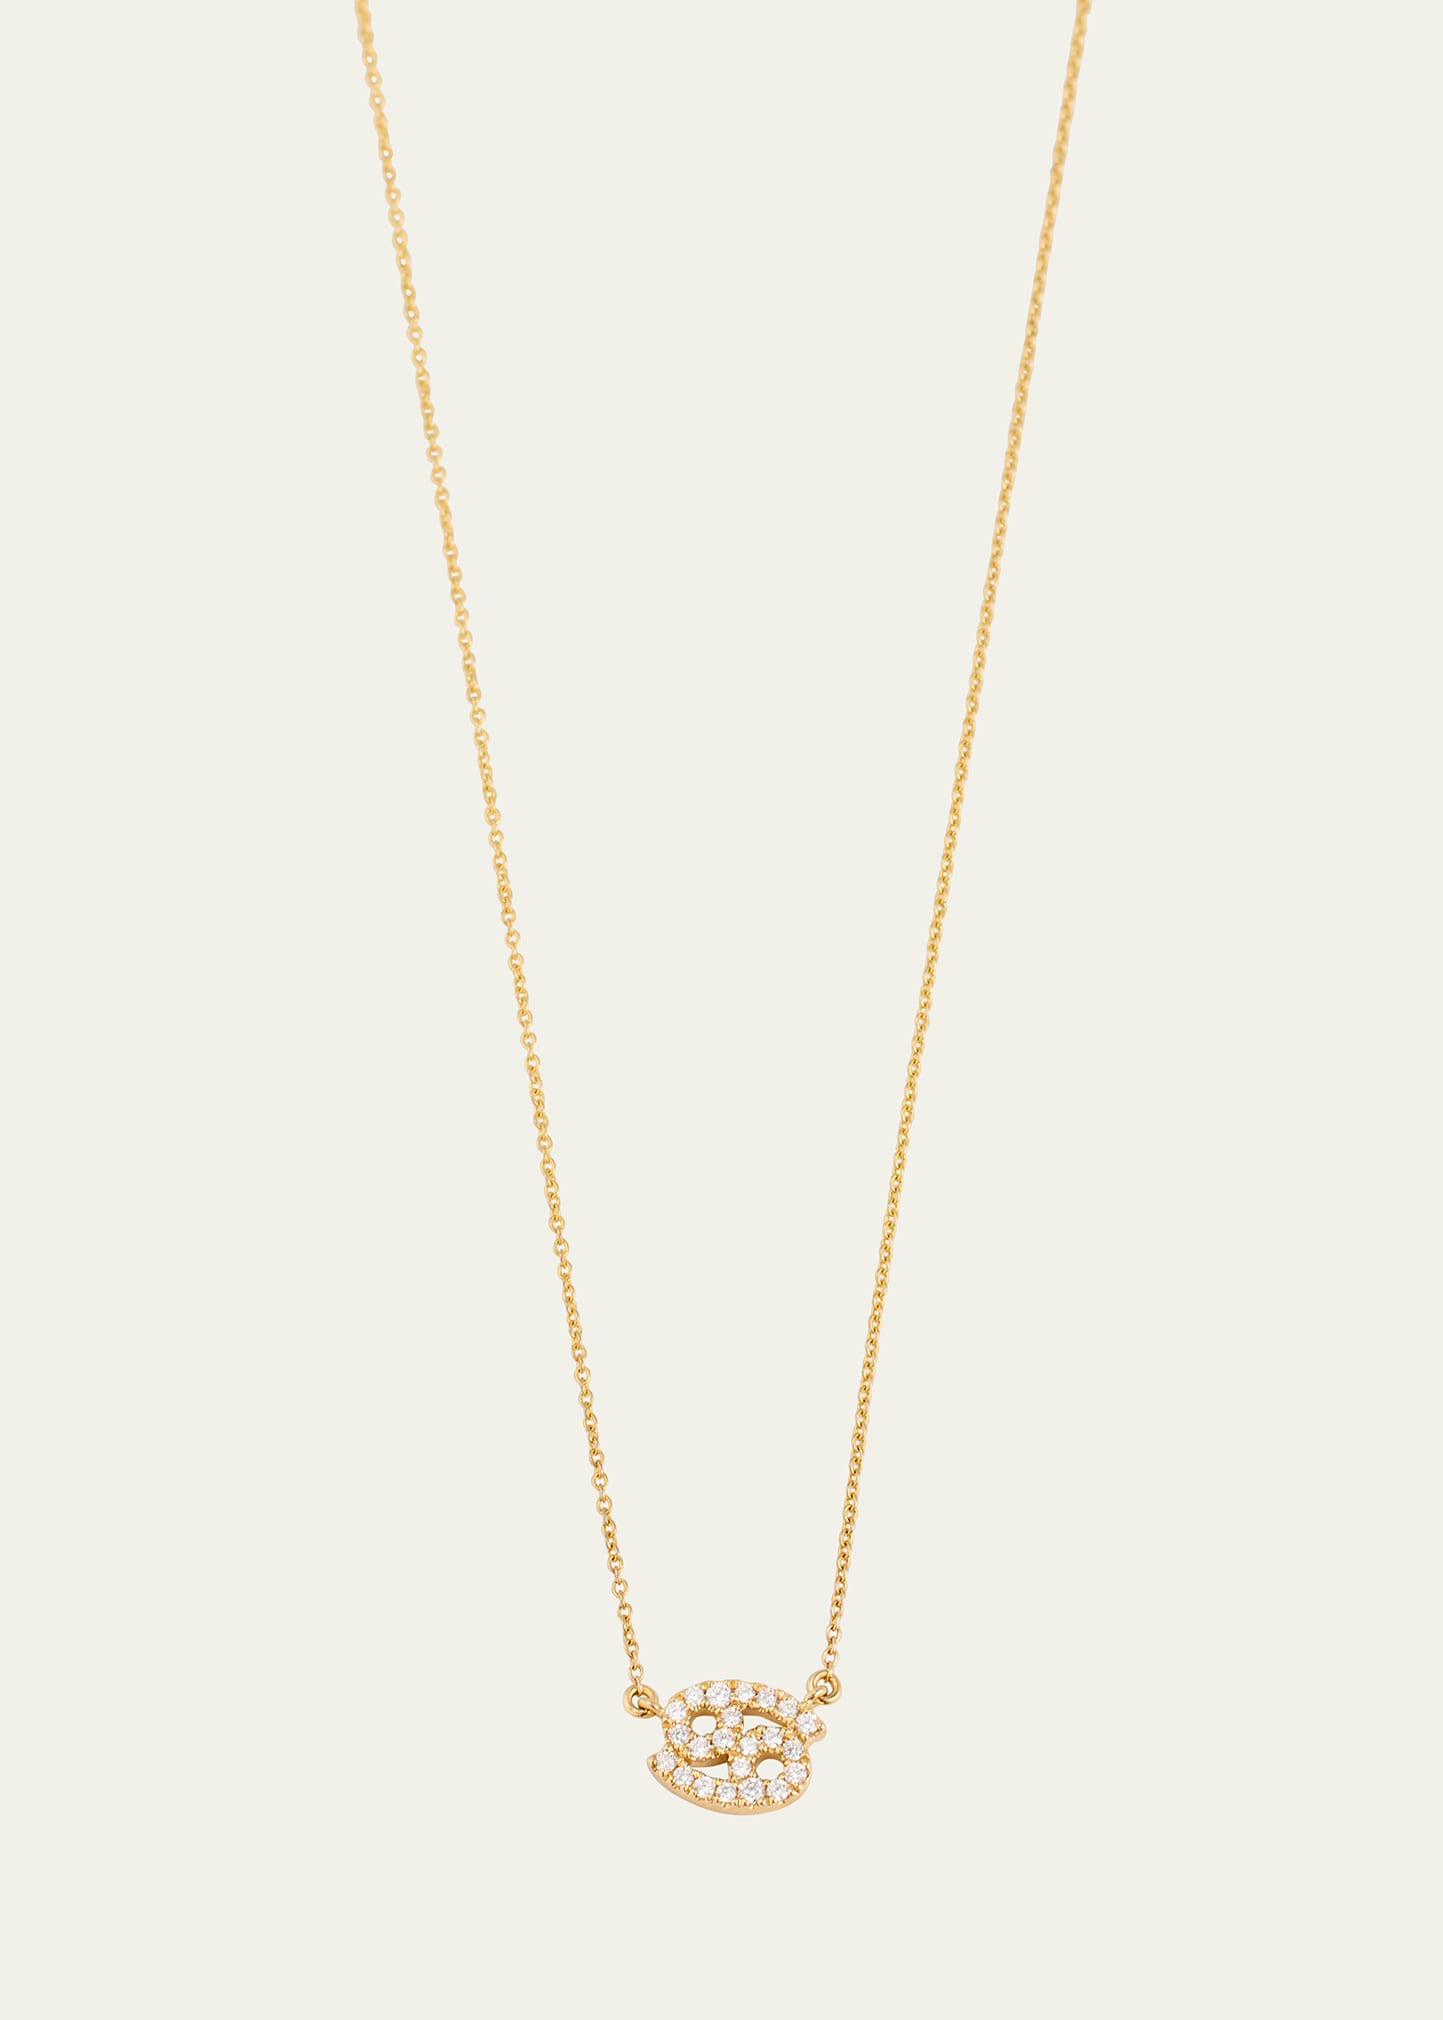 Star Sign Necklace, Cancer, in Yellow Gold and White Diamonds